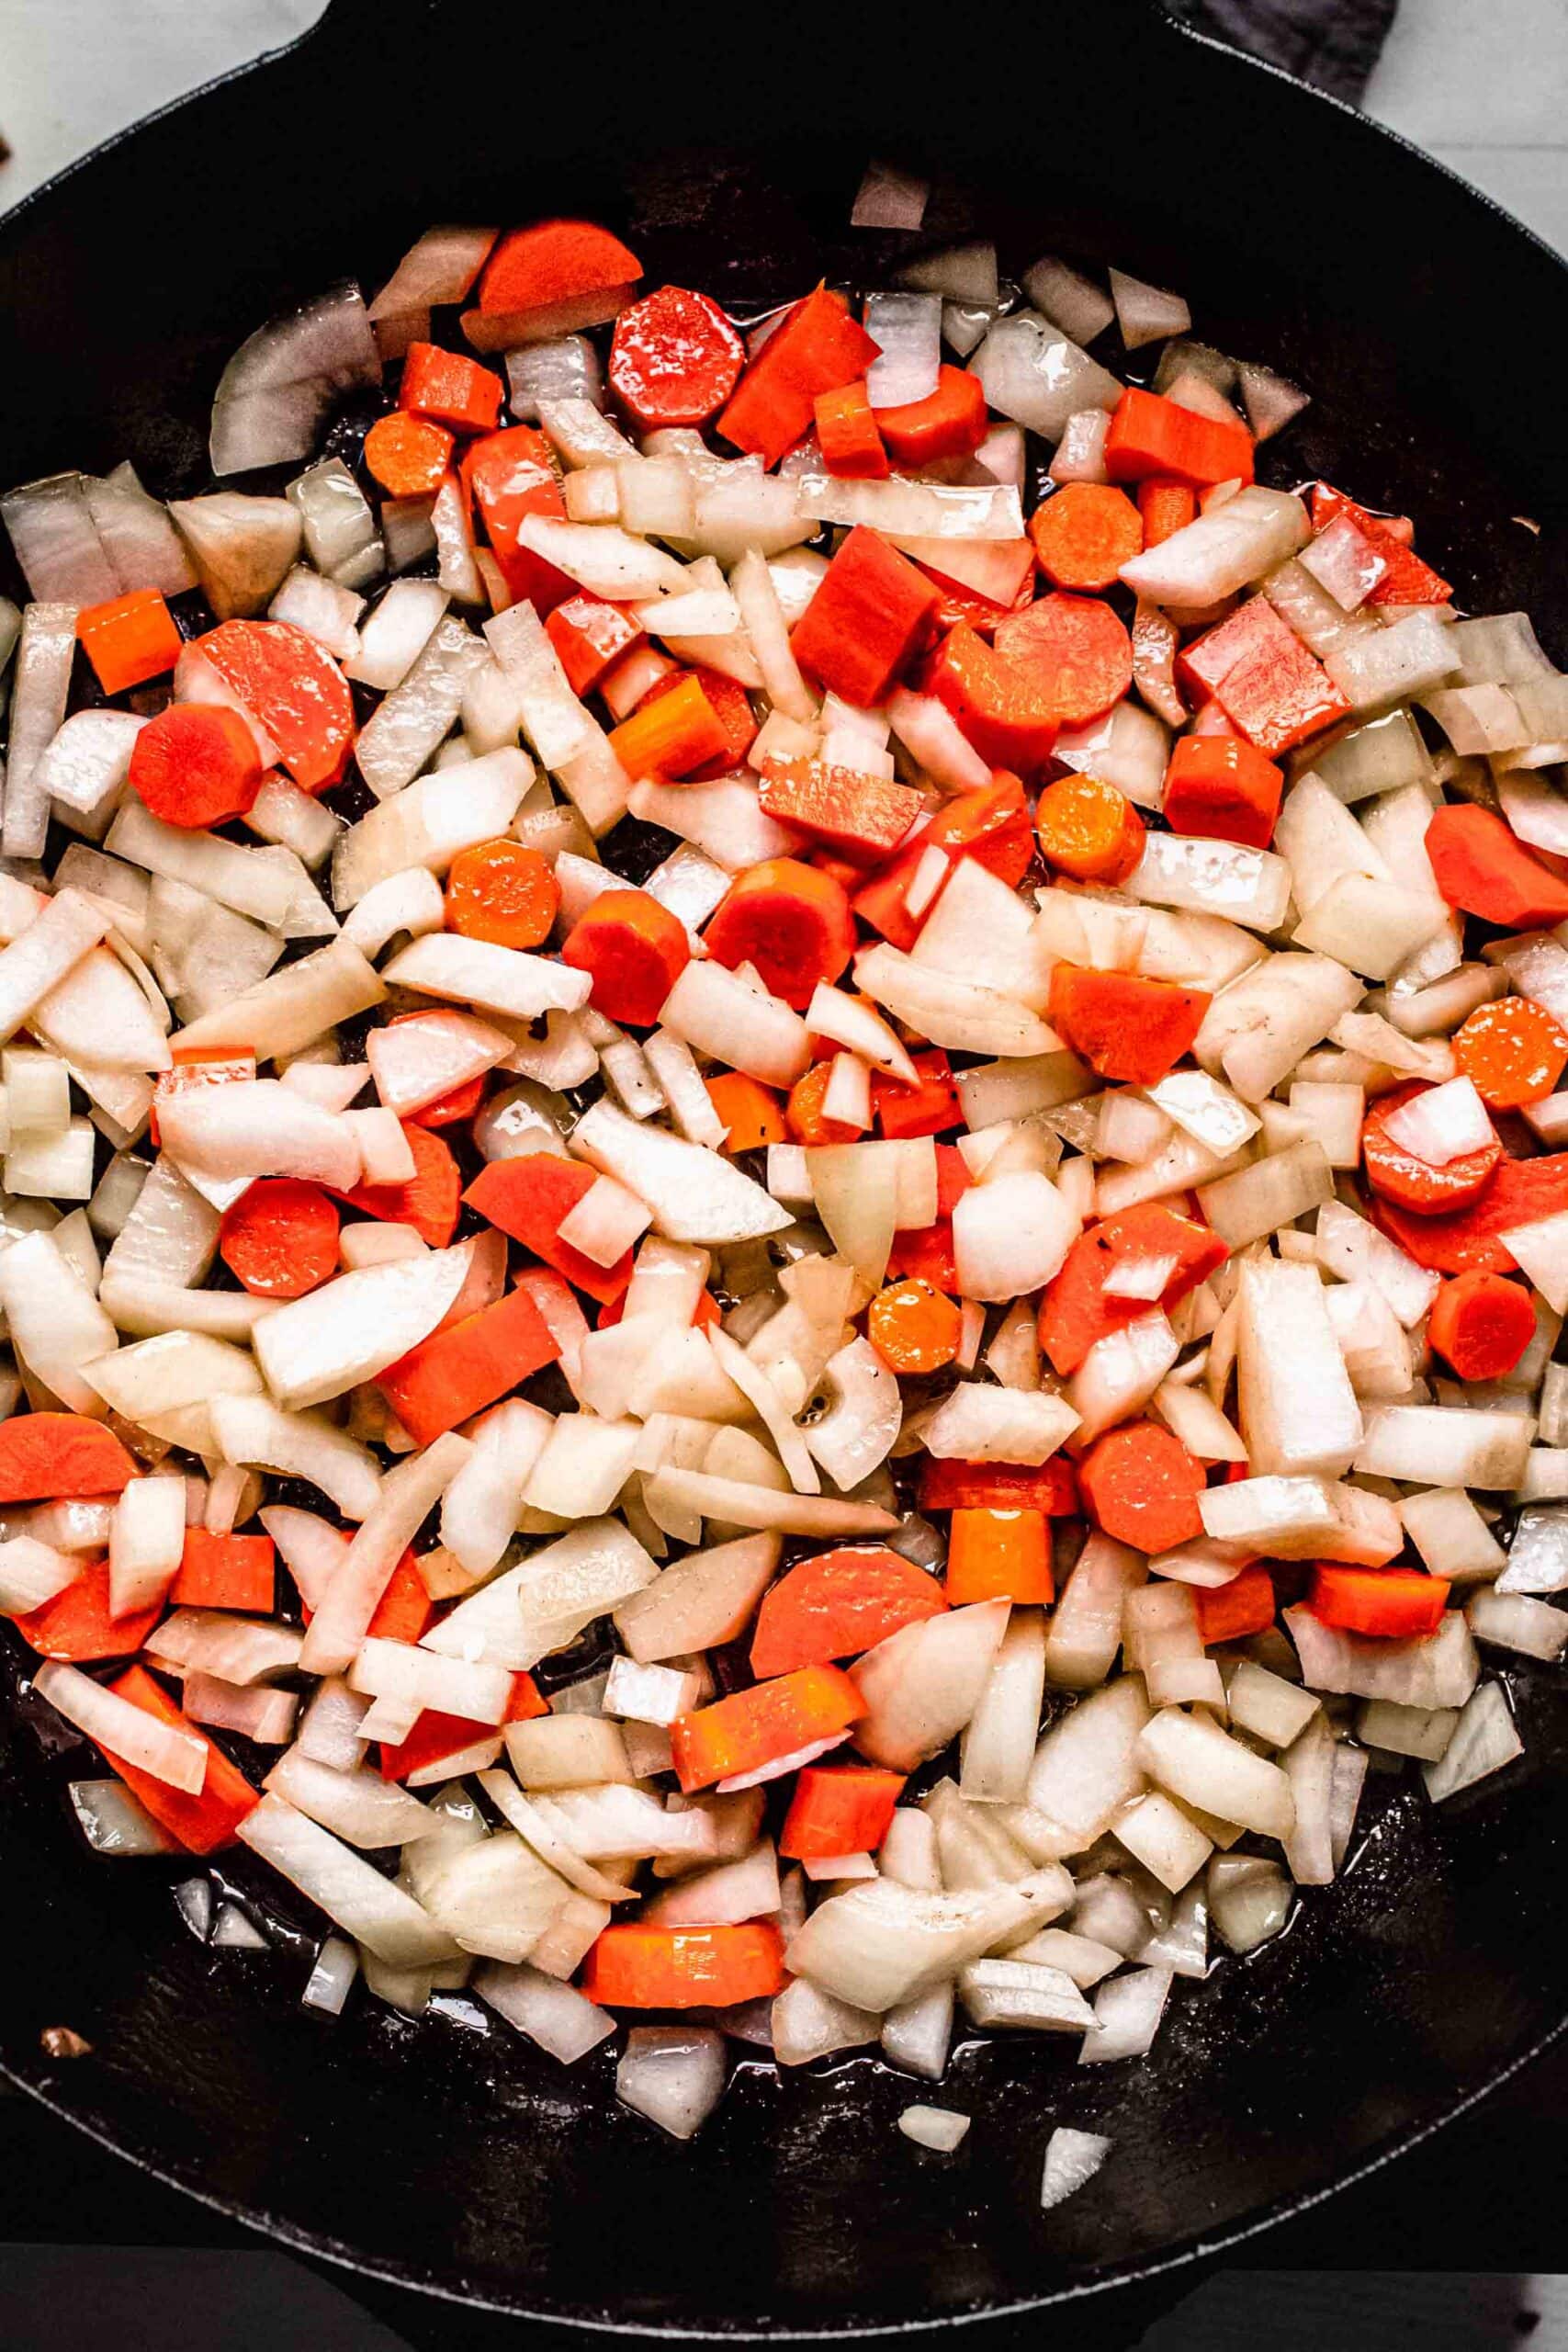 Sauteed carrots and onions in skillet.